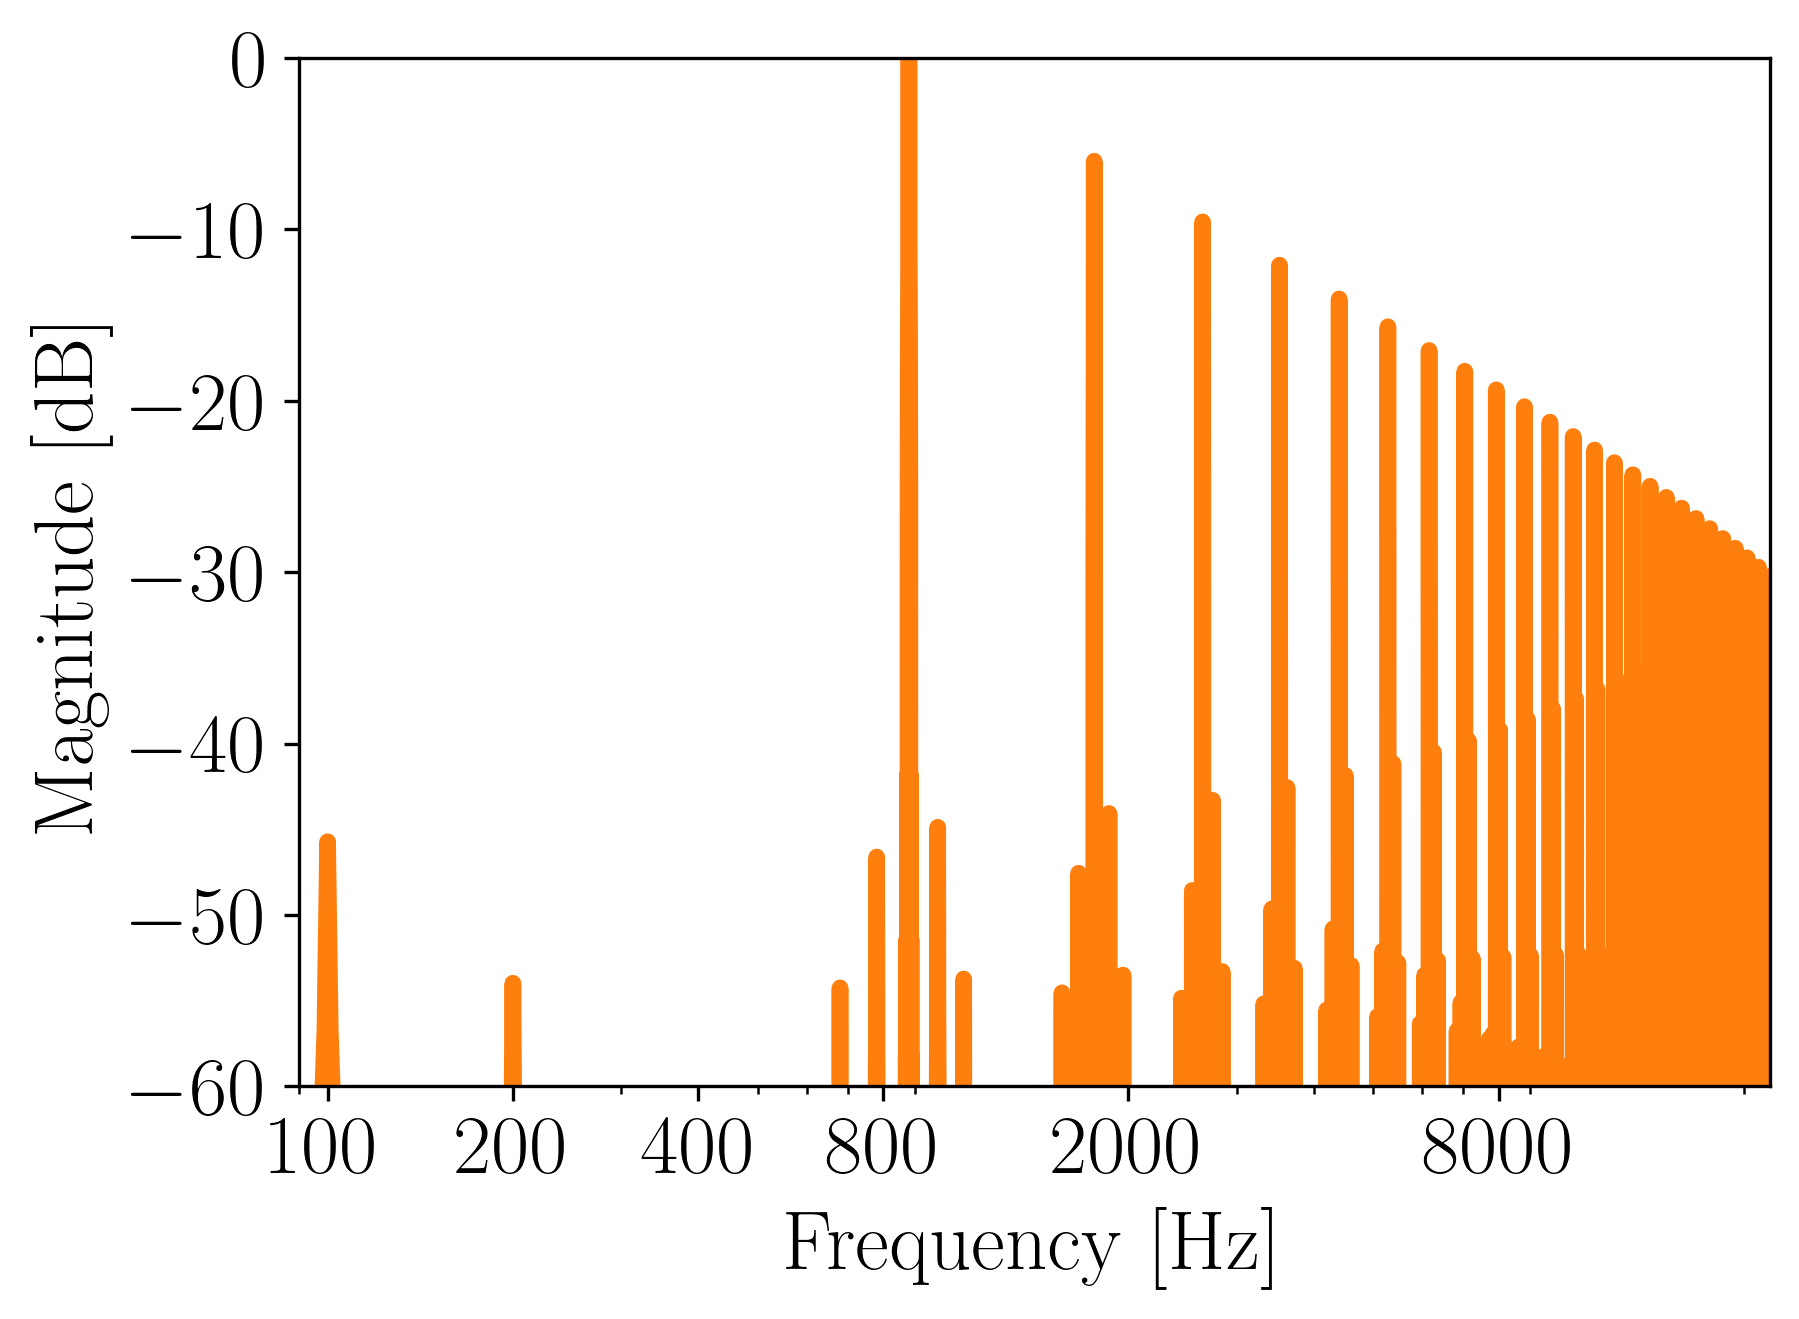 Magnitude frequency spectrum of a 880 Hz sawtooth generated with wavetable synthesis